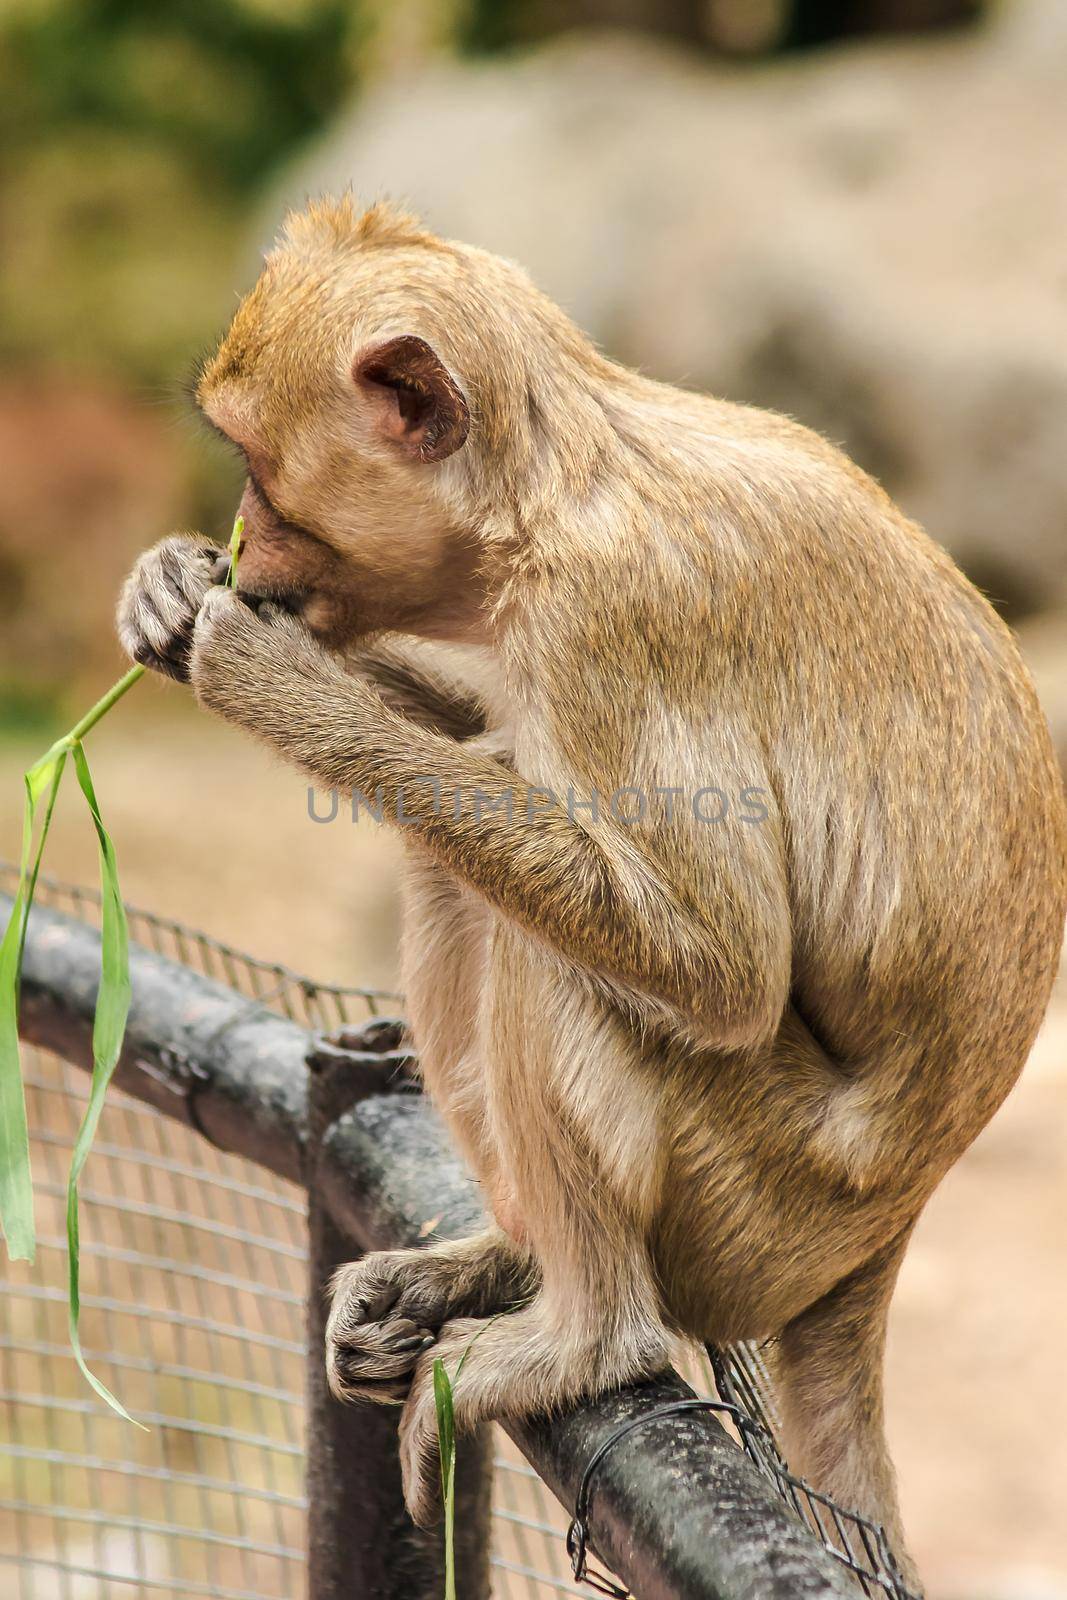 Crab-eating Macaque sat on the fence, eating the grass. by Puripatt